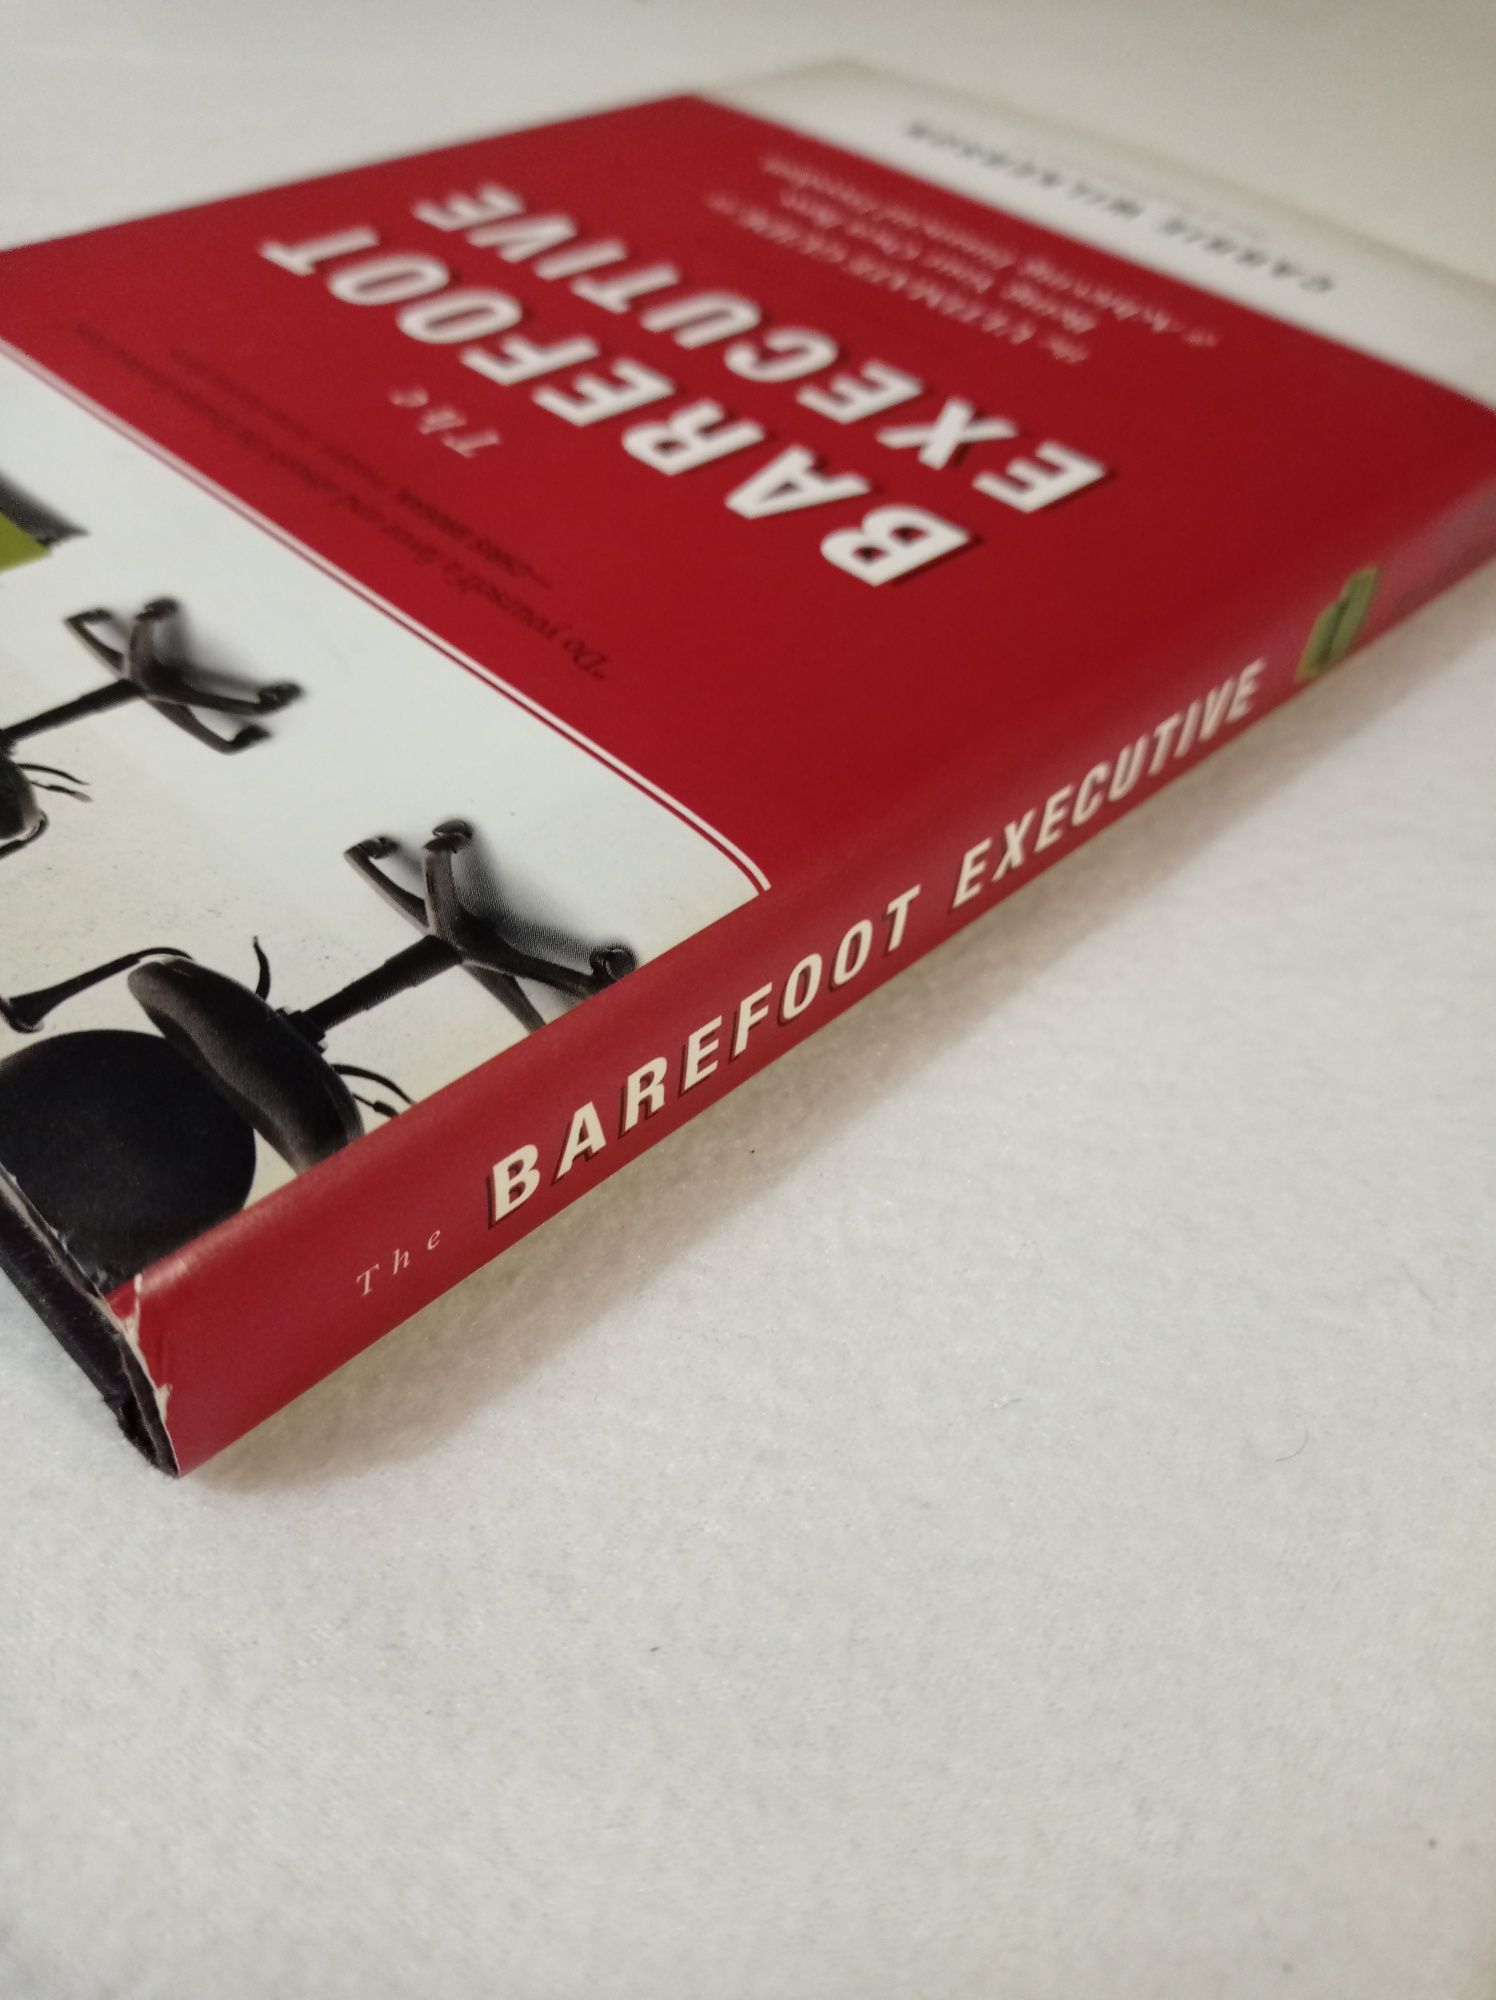 The barefoot executive - Carrie Wilkerson